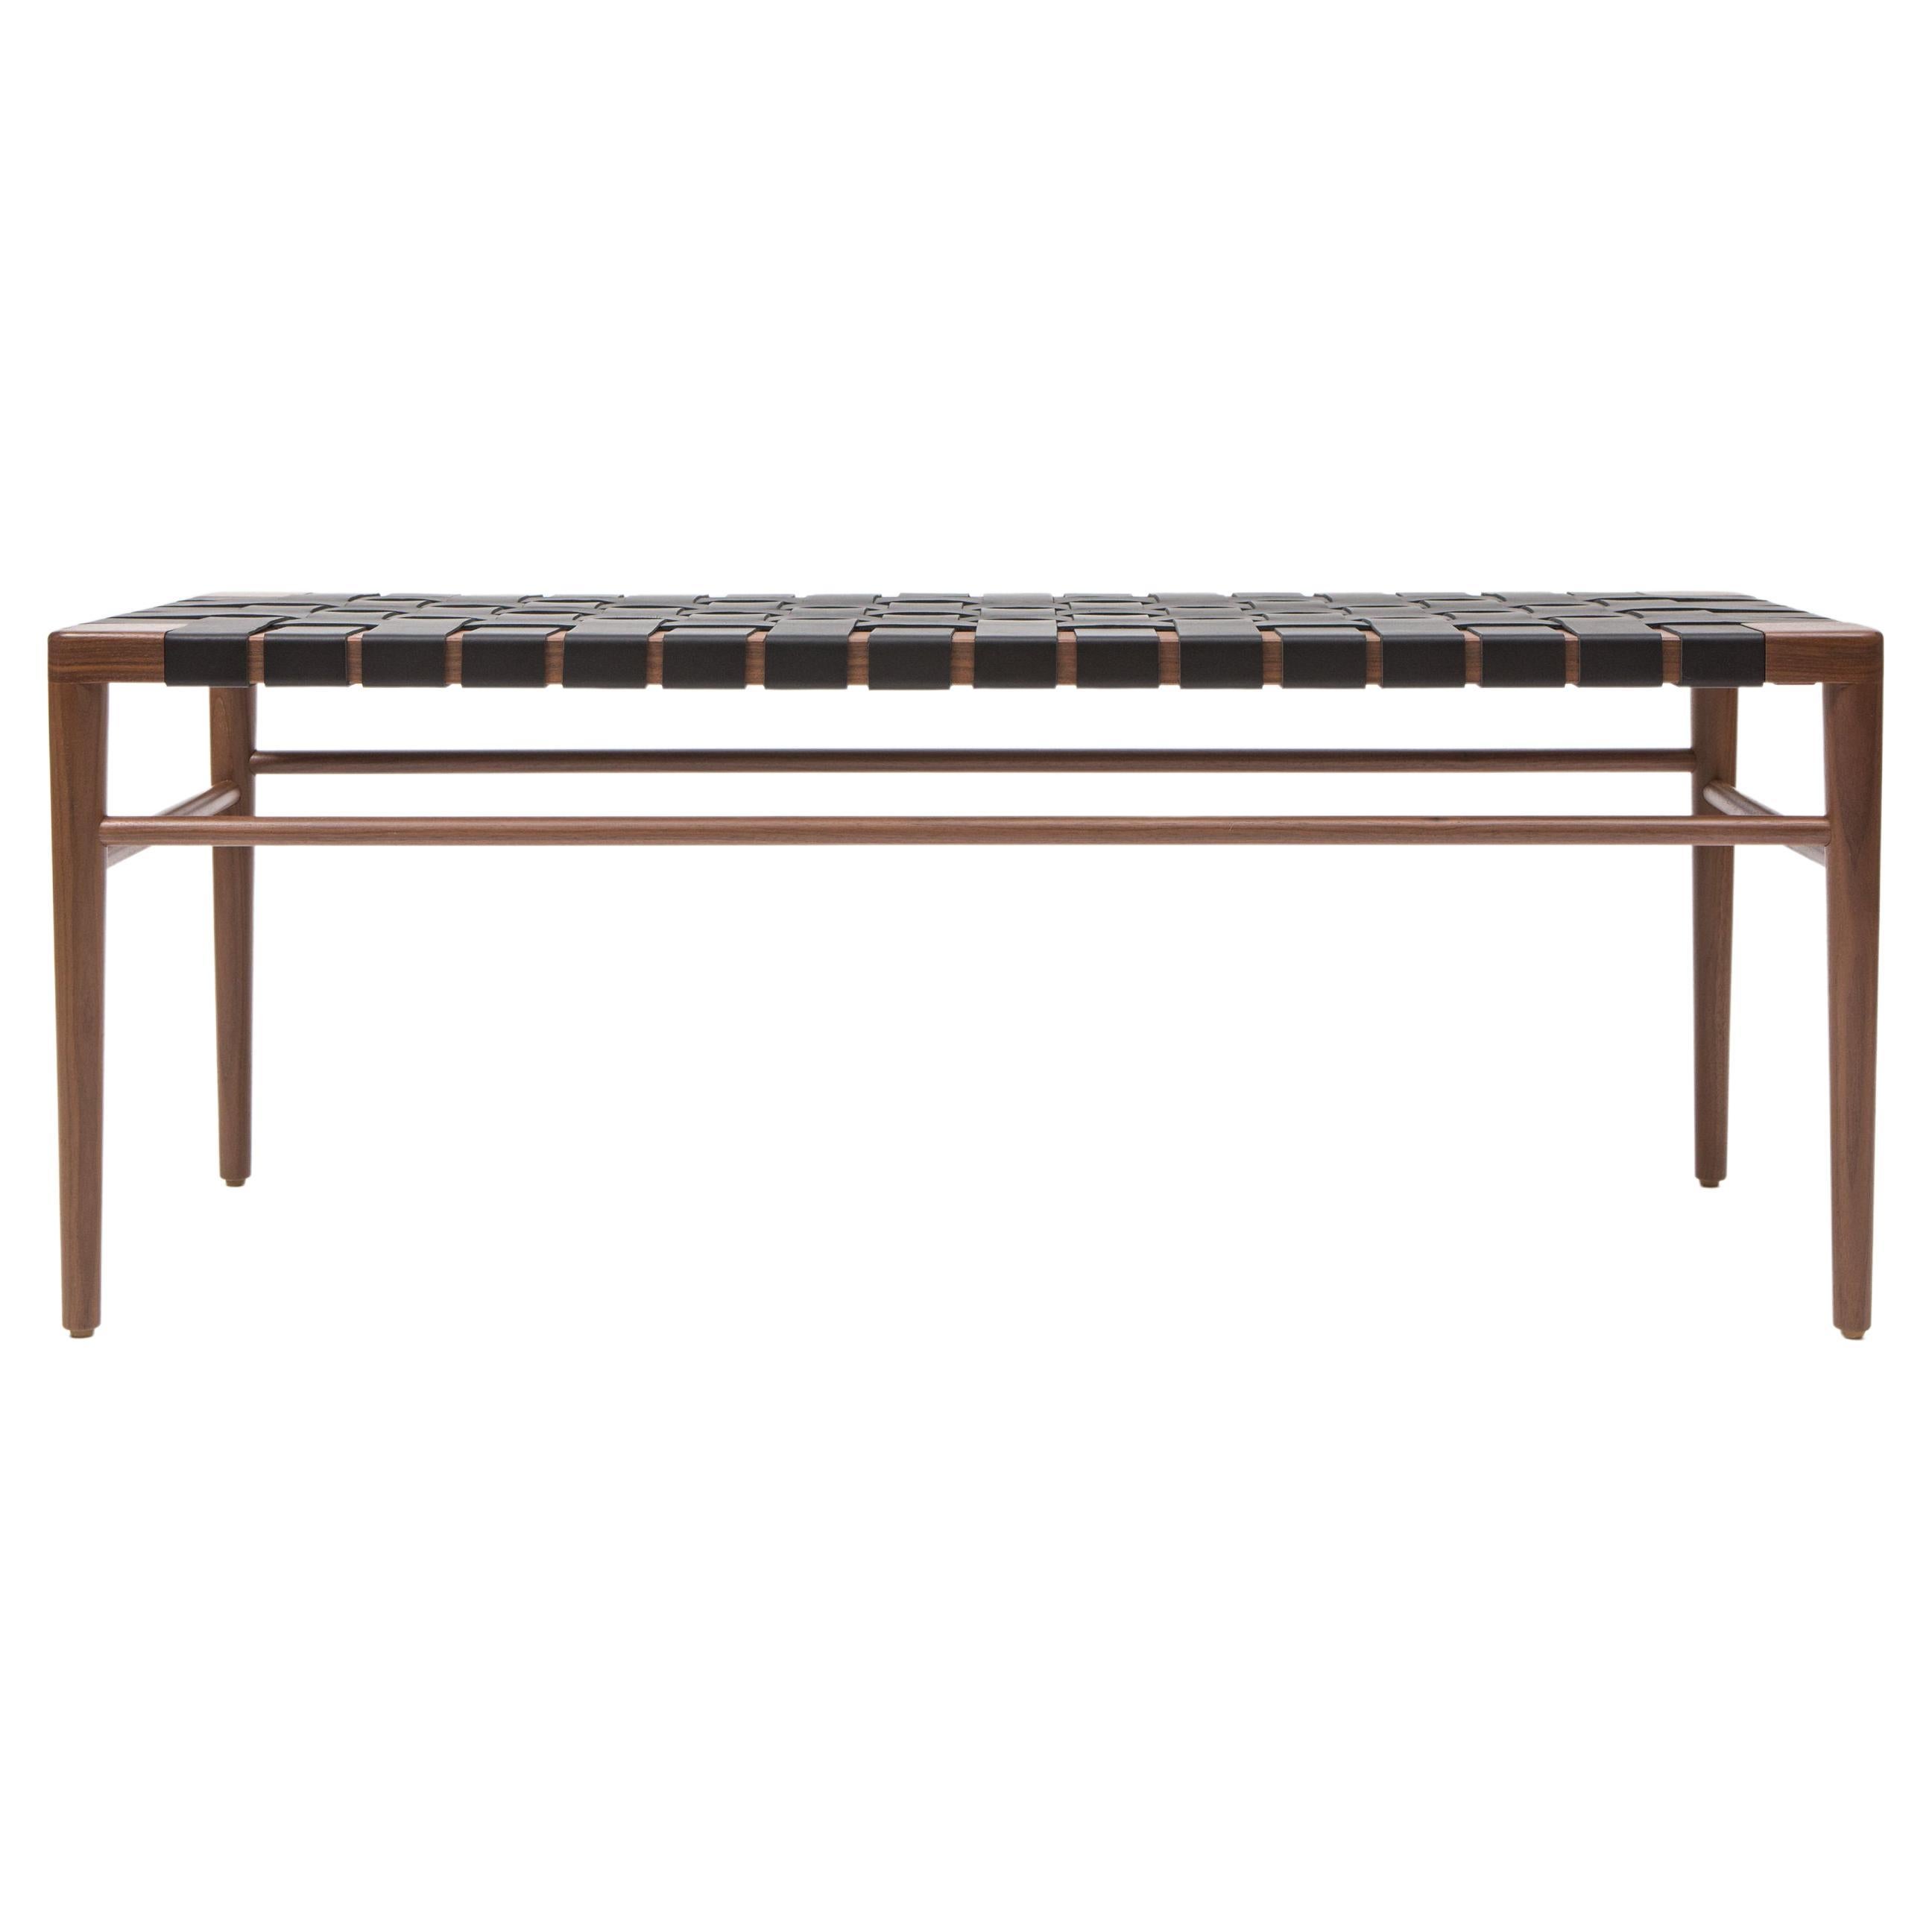 60" Woven Leather Bench in Walnut and Black Leather by Mel Smilow